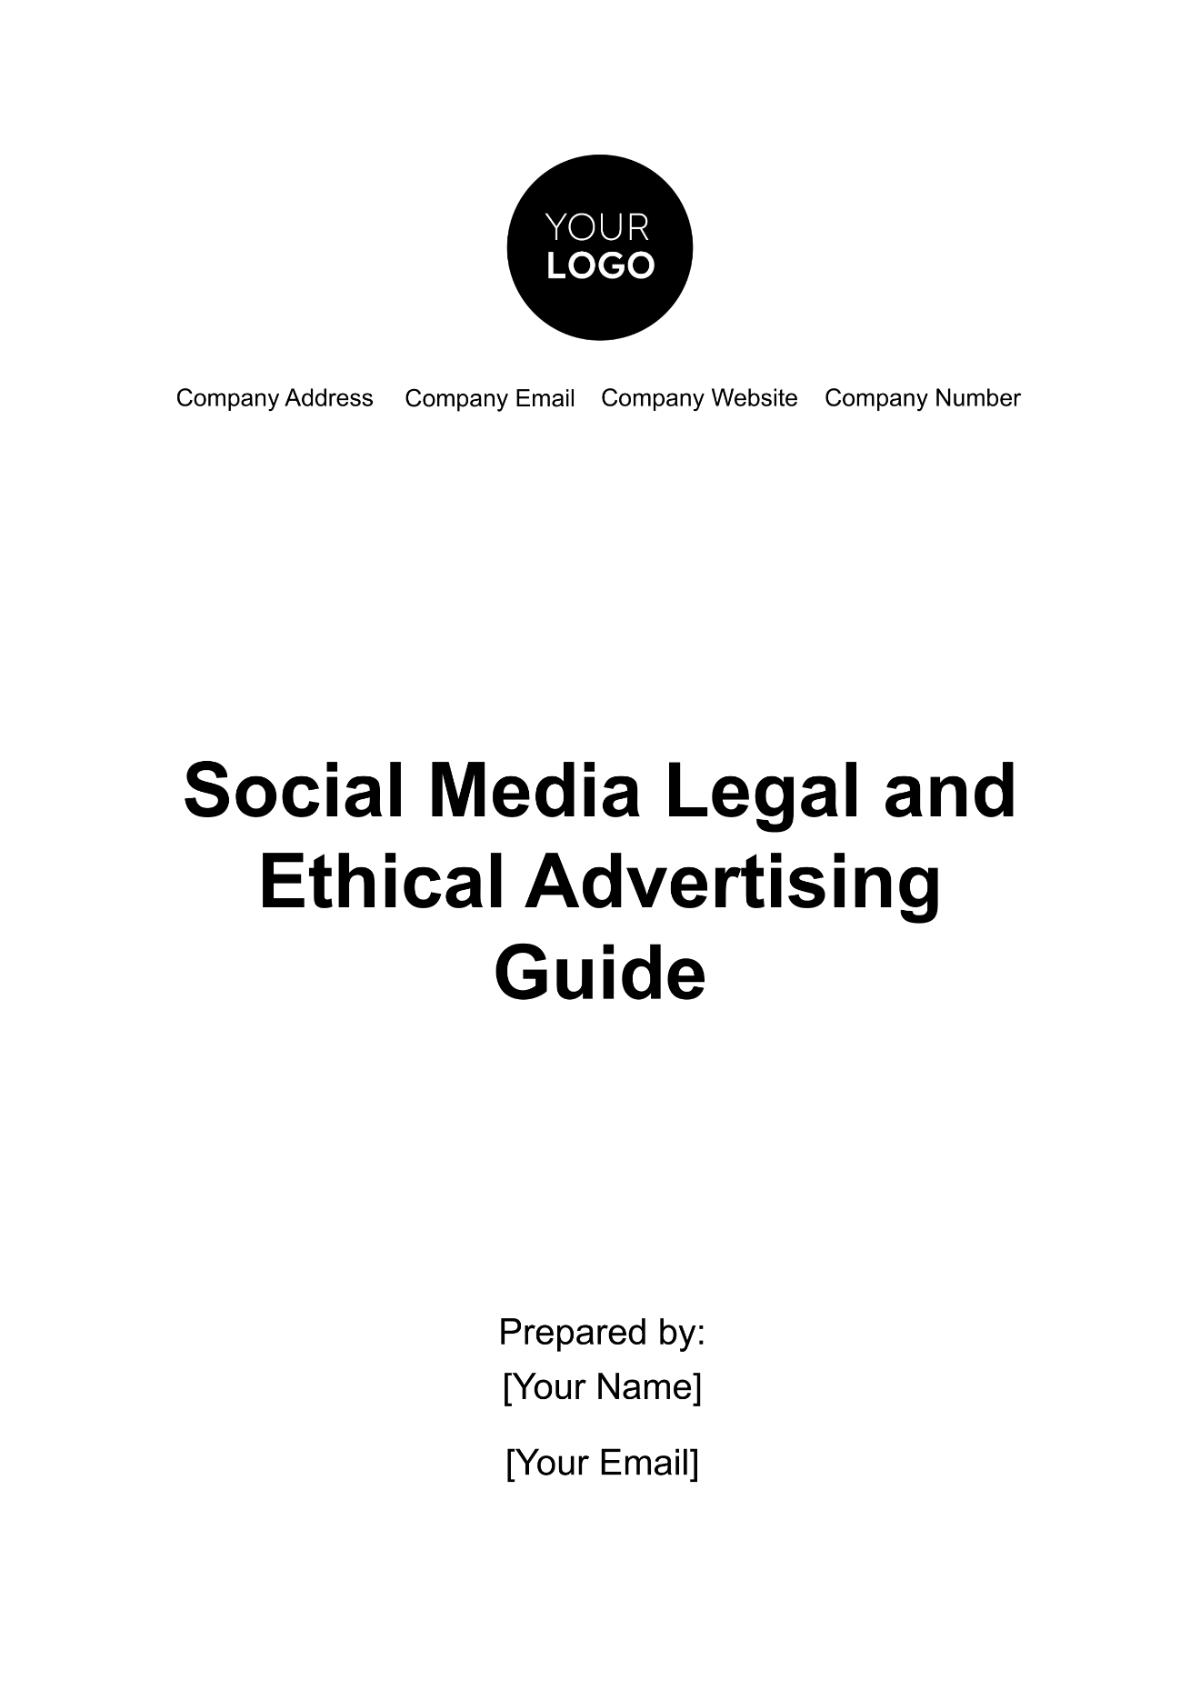 Free Social Media Legal and Ethical Advertising Guide Template